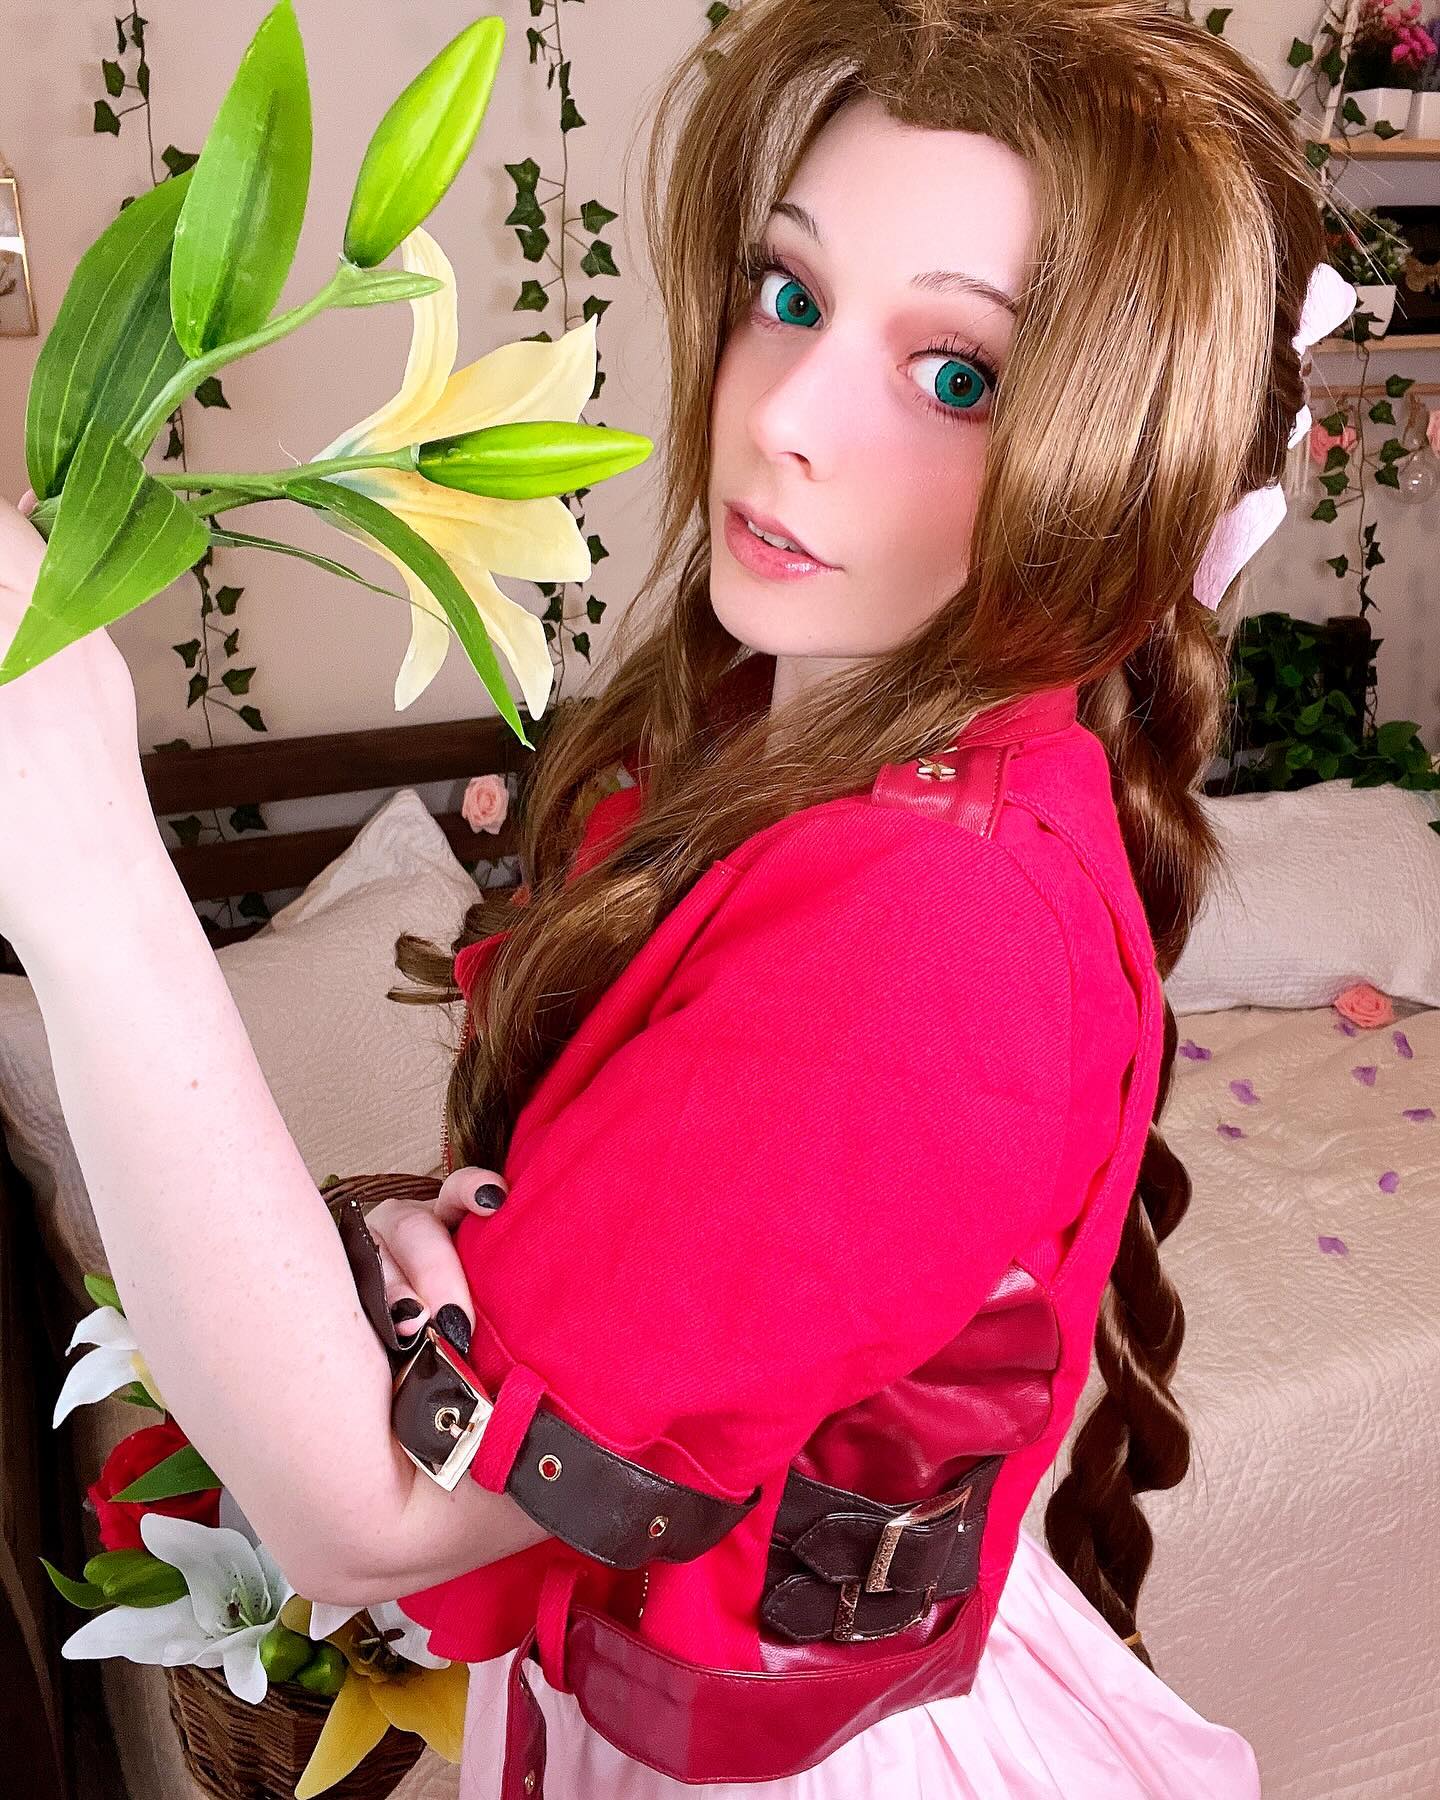 I wanted to bring back my Aerith cosplay! 🥰 Is anyone playing rebirth?? I REALLY want to play it but I don’t have a ps5 😭 

#aerith #aerithcosplay #finalfantasy #tiktok #gamer #gamergirl #gamergirls #girlgamer #egirl #twitchtv #twitch #twitchstreamer #streamer #femalestreamer #kawaii #anime #green #greenhair #petite #petitegirl #petitegirls #uwugirl #wifu #animewifu #cosplay #cosplayer #cosplaygirl #anime #weeb #softgirl